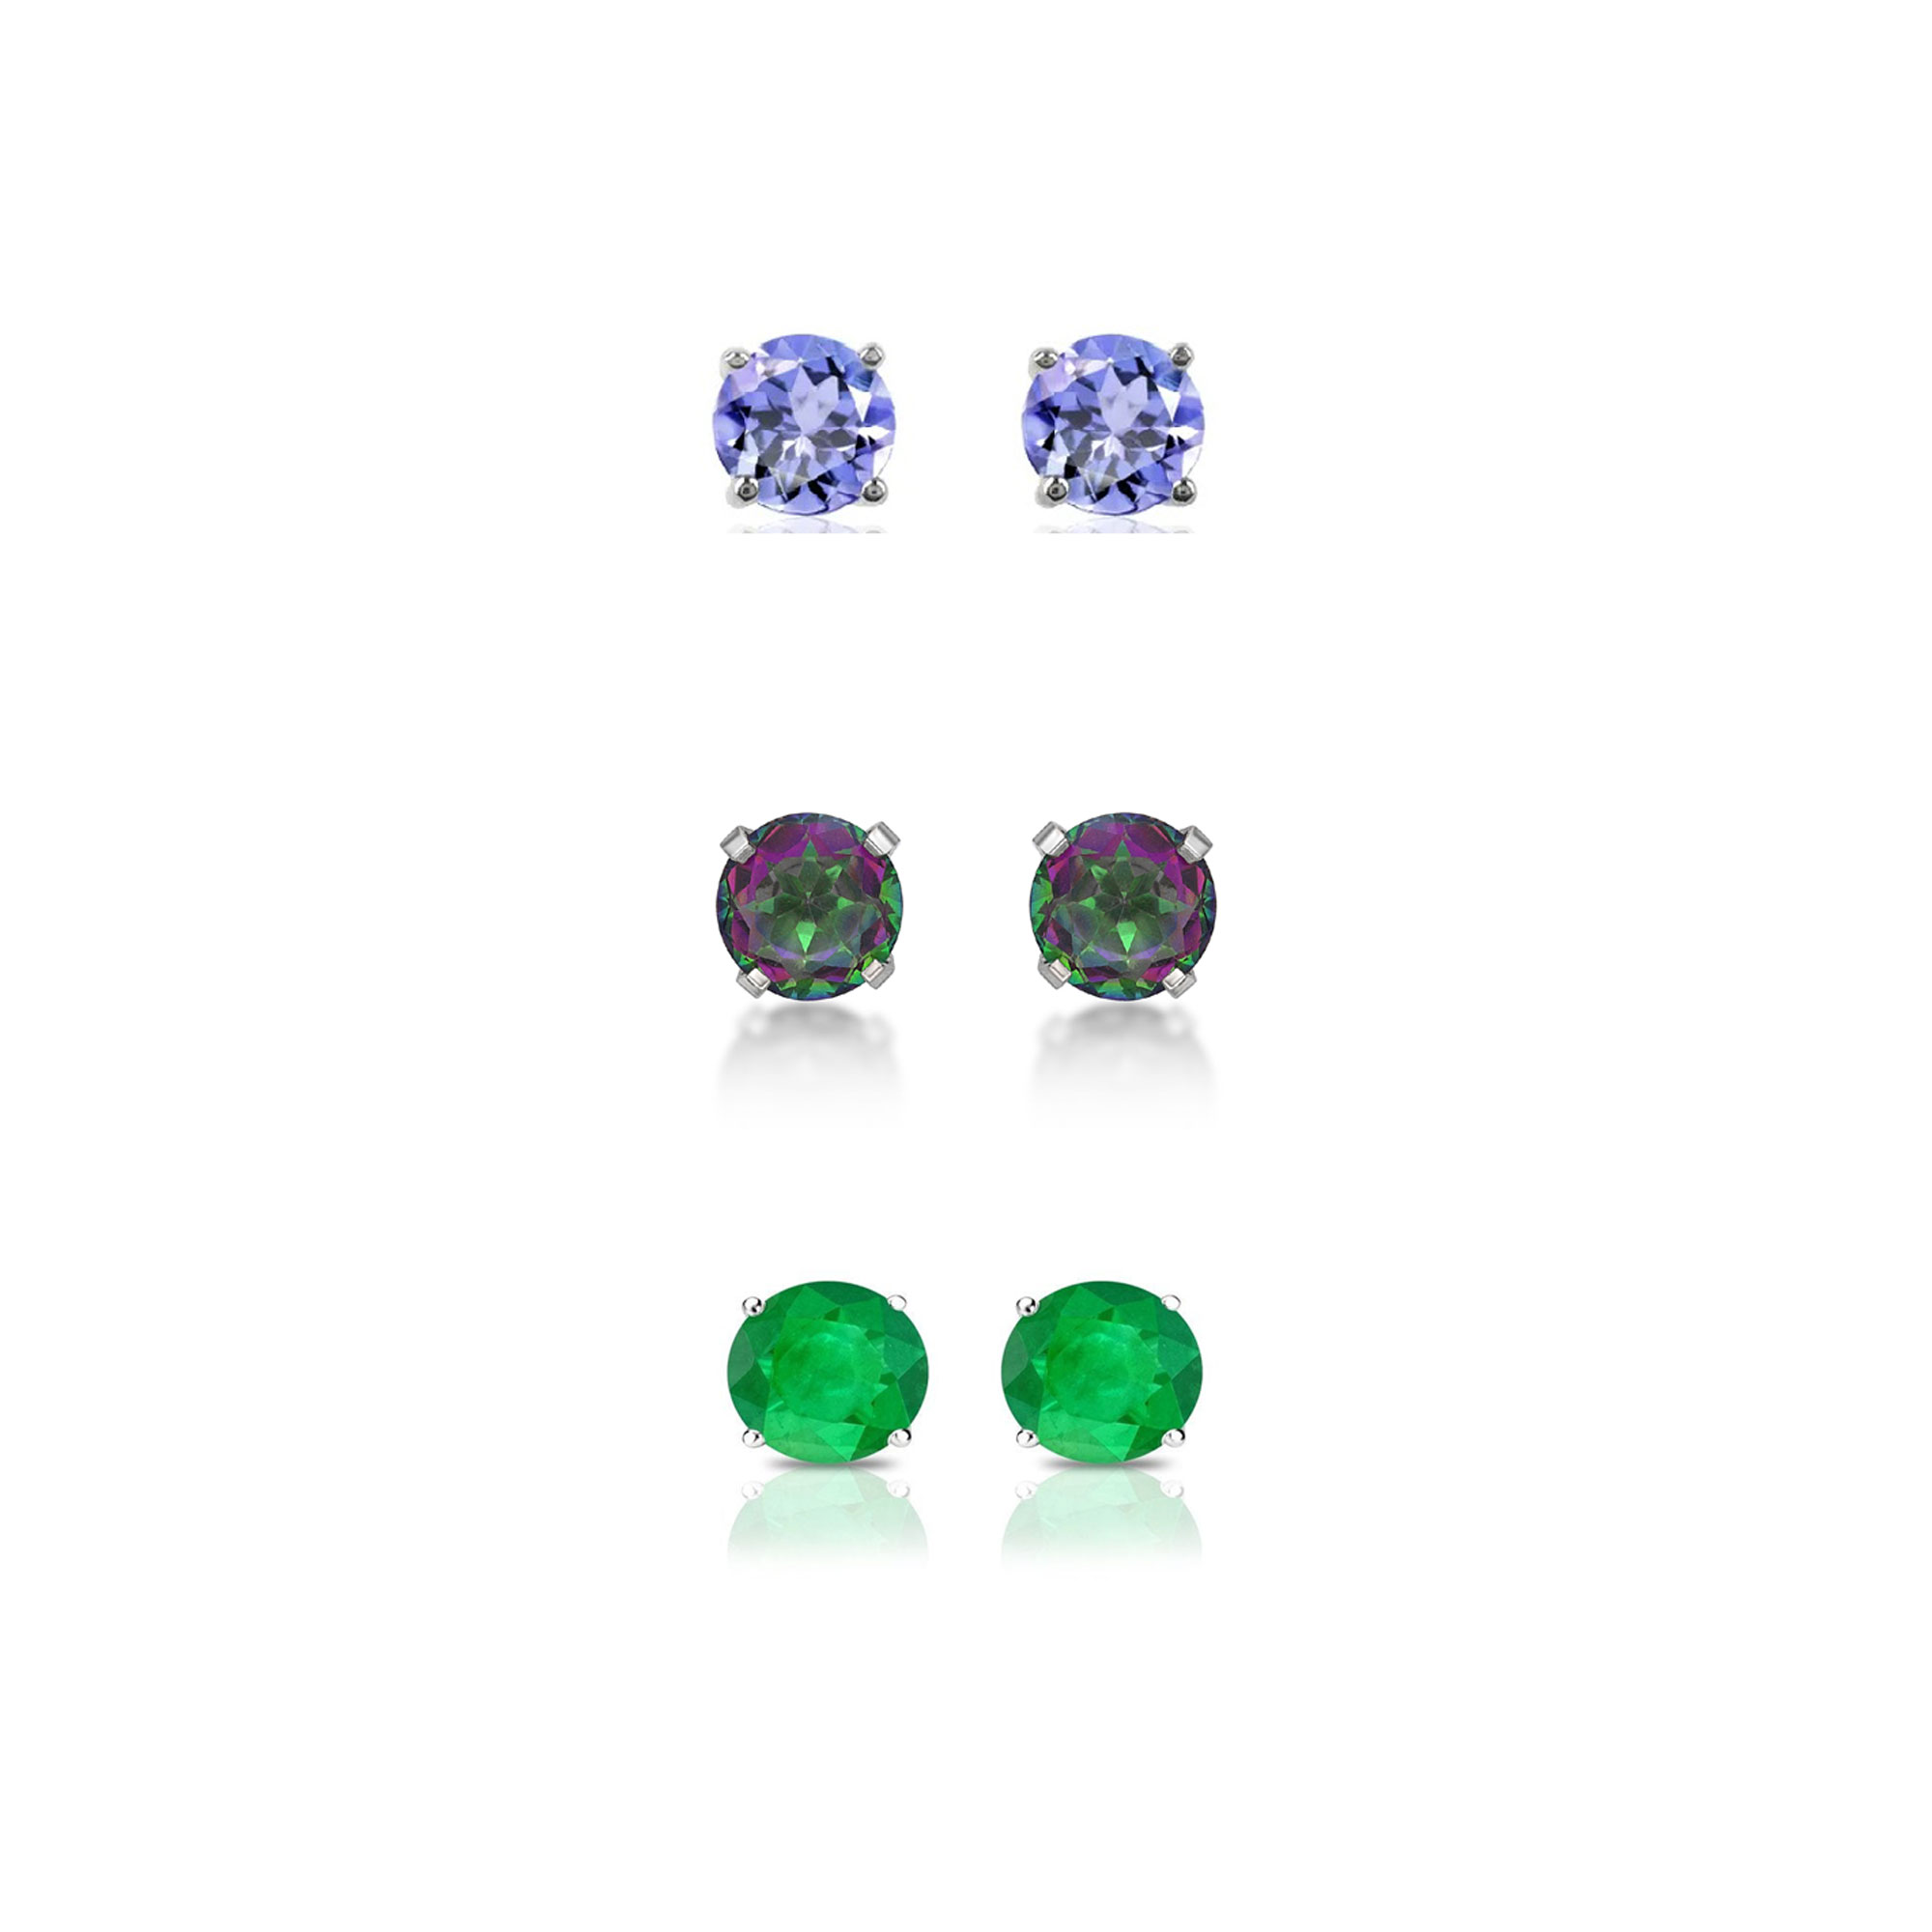 BJ Jewelry 18k White Gold Plated 1/2Ct Created Tanzanite, Mystic Topaz and Emerald 3 Pair Round Stud Earrings